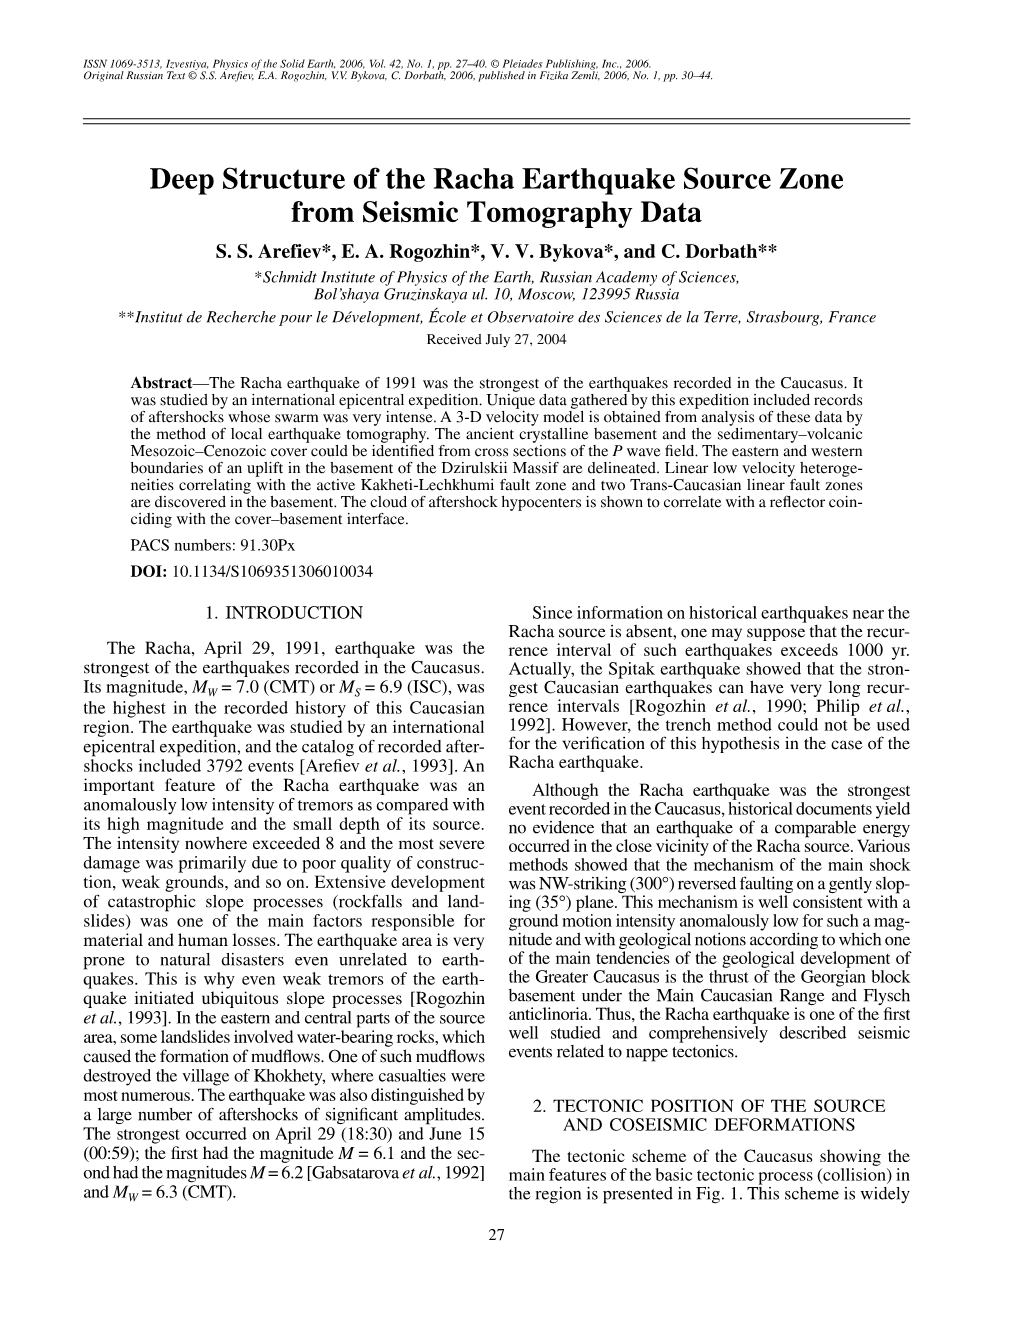 Deep Structure of the Racha Earthquake Source Zone from Seismic Tomography Data S